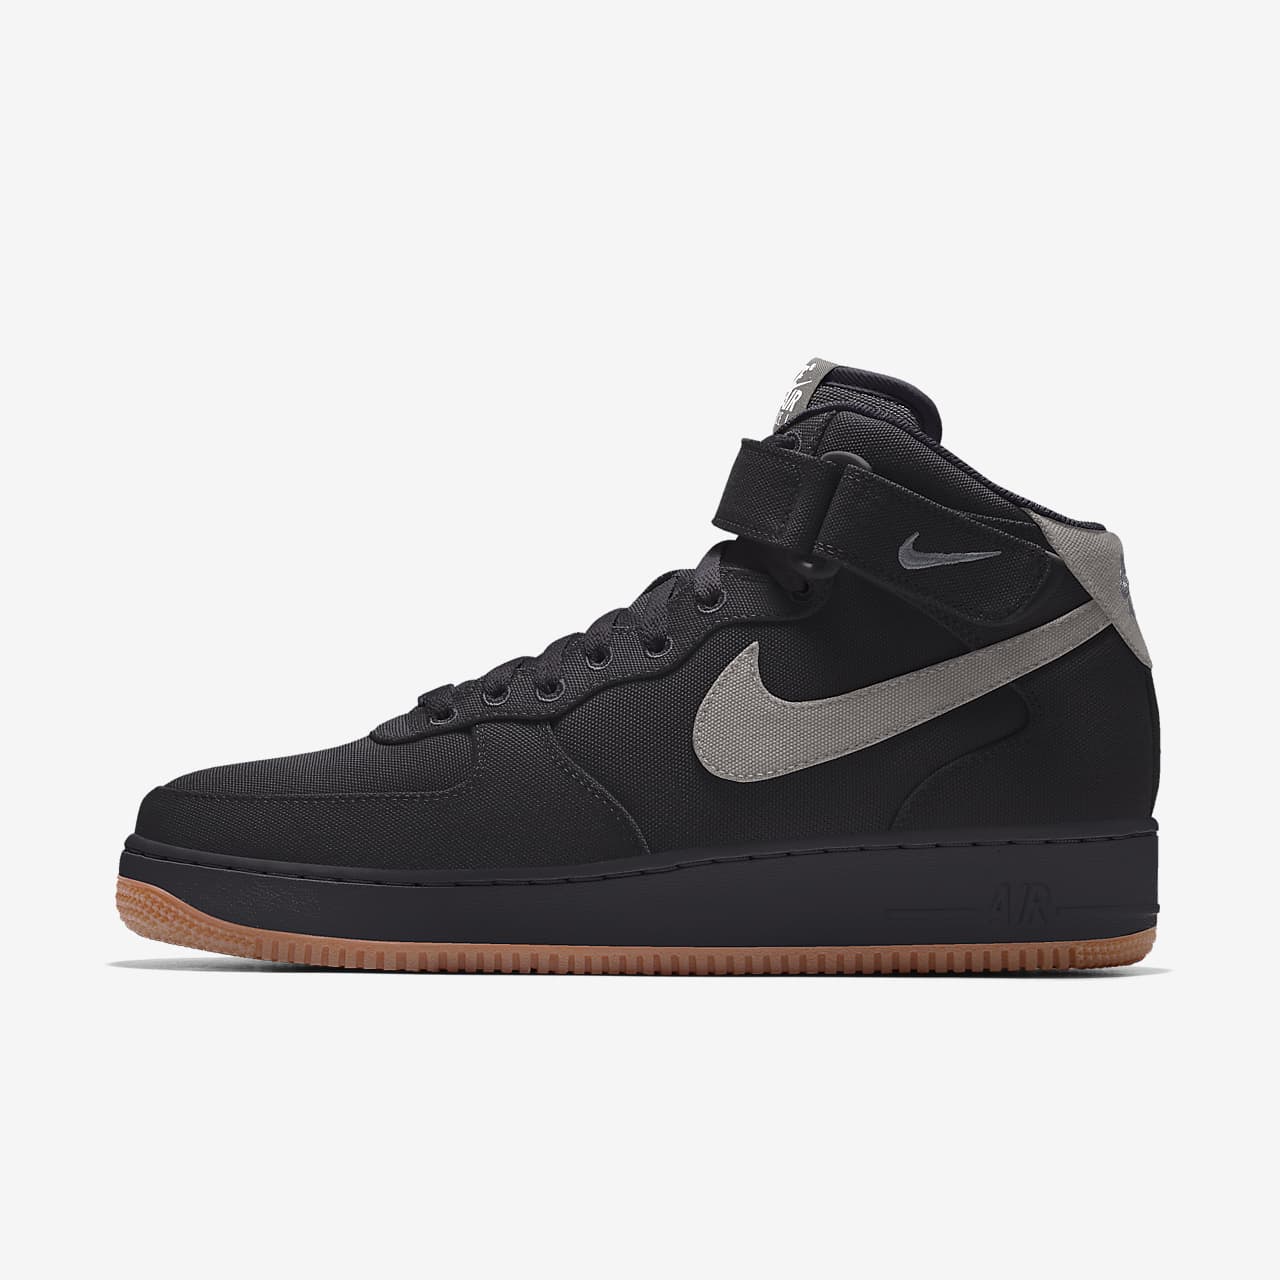 Sapatilhas personalizáveis Nike Air Force 1 Mid By You para homem